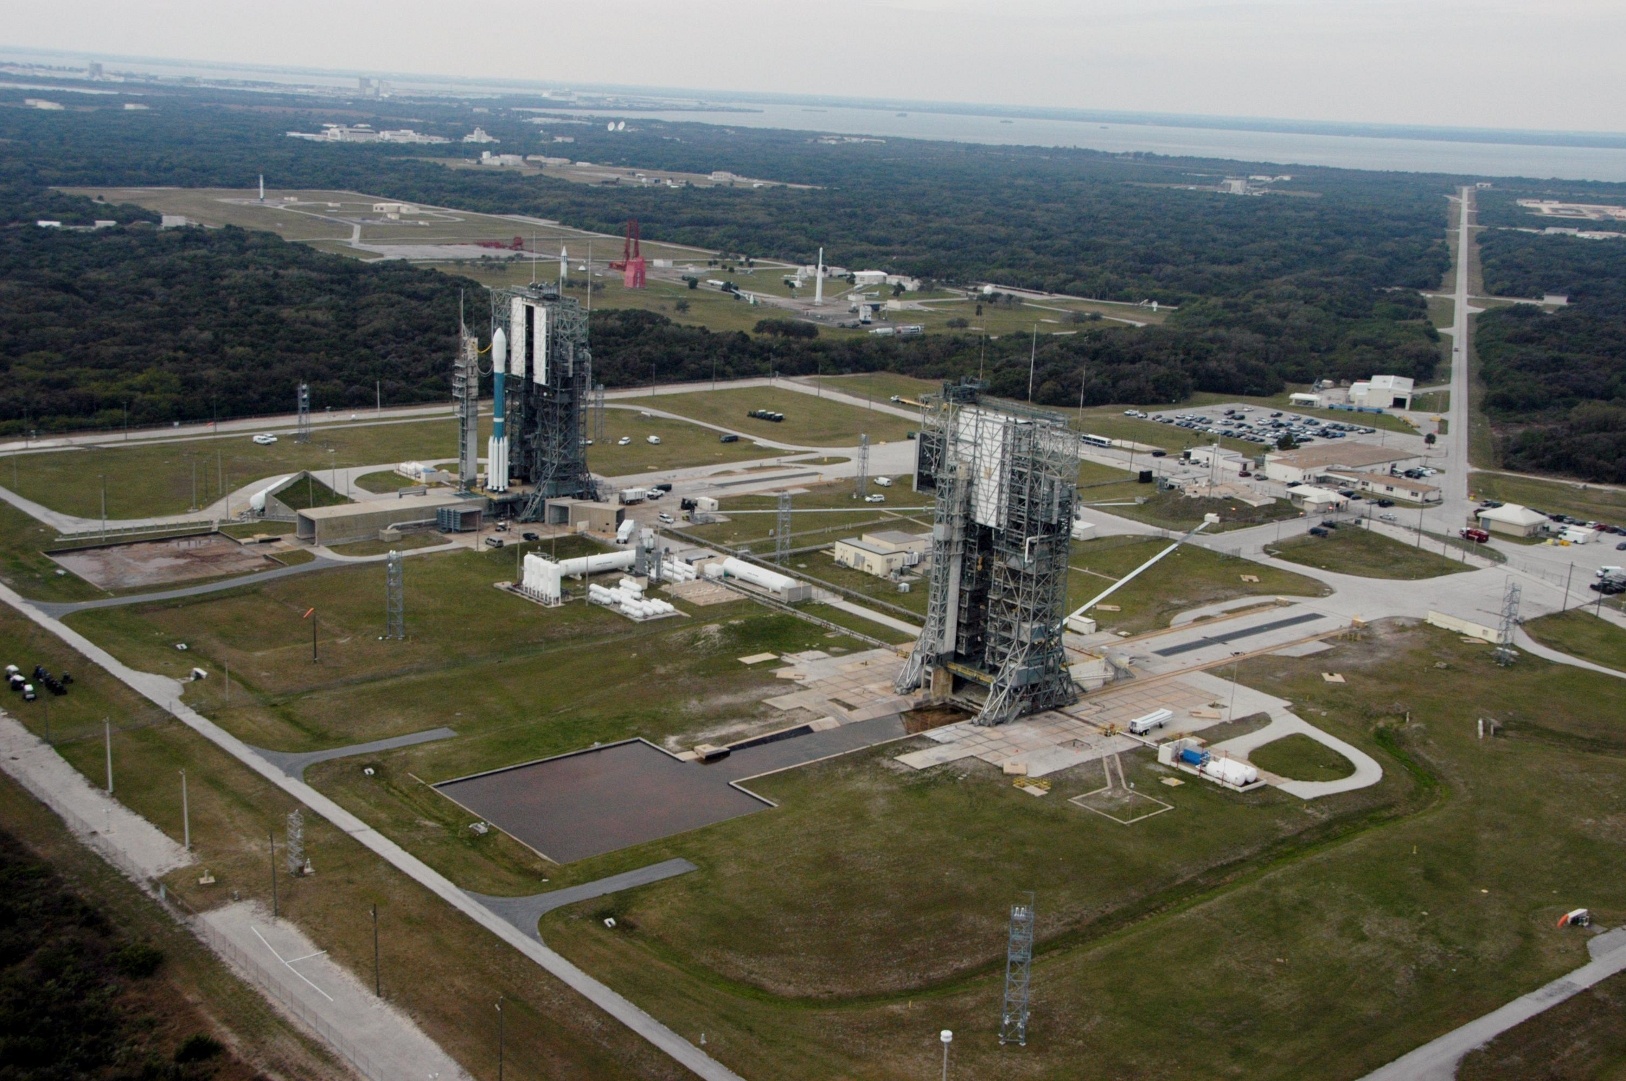 http://www.net4info.de/photos/cpg/albums/userpics/10002/cape_Canaveral_Air_Force_Station.jpg